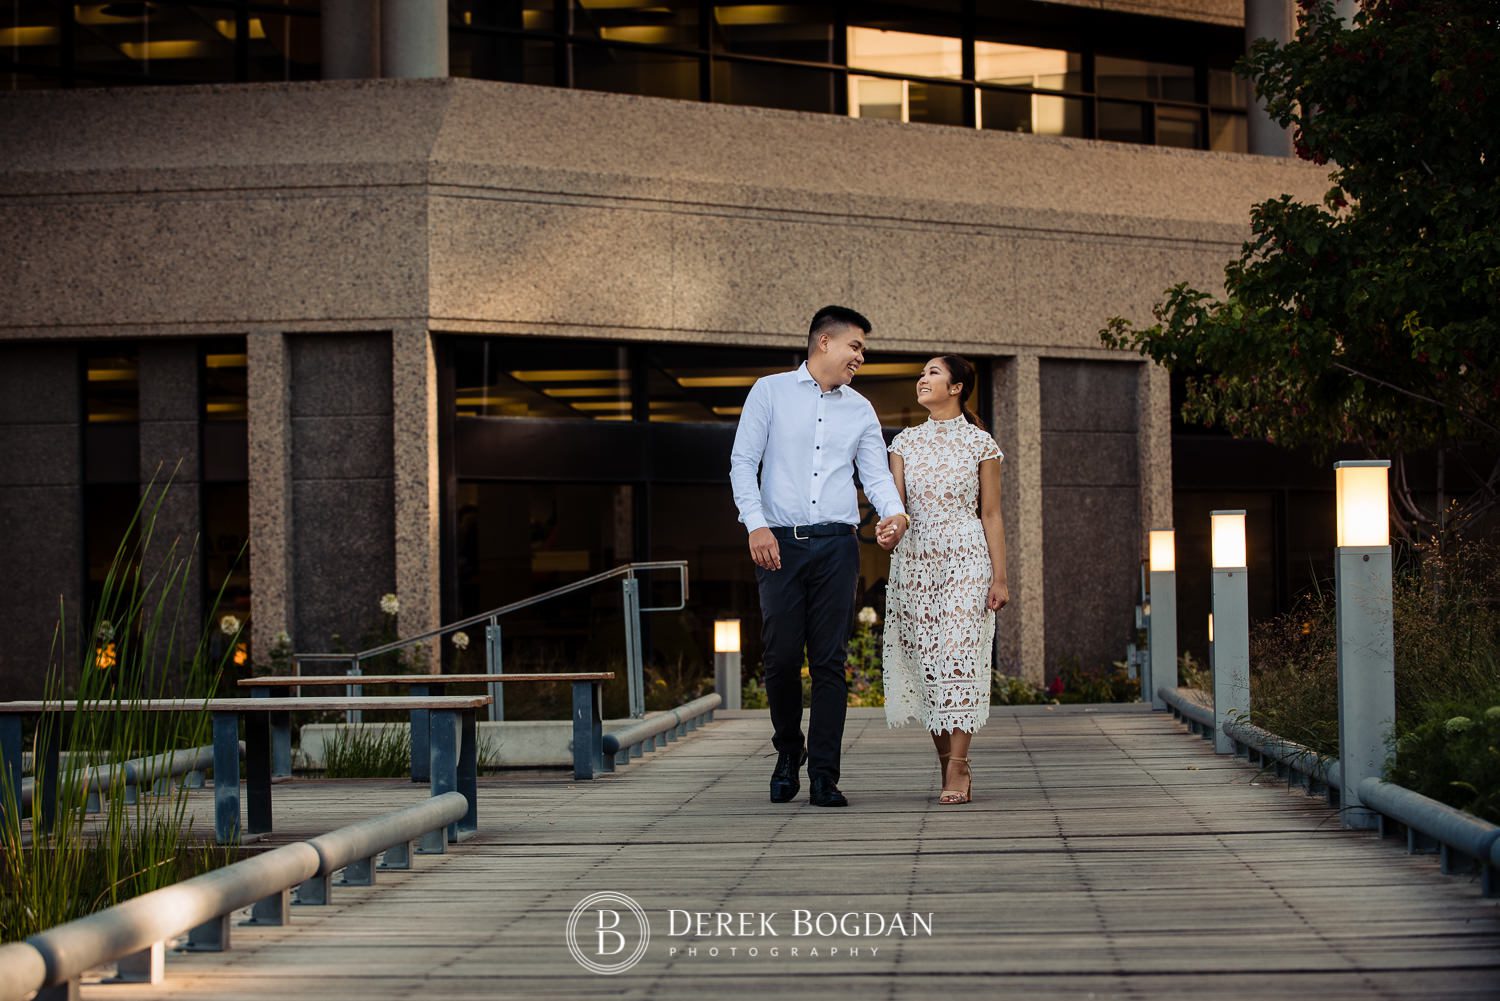 Engagement photo at Millenium Library Park couple walking and smiling